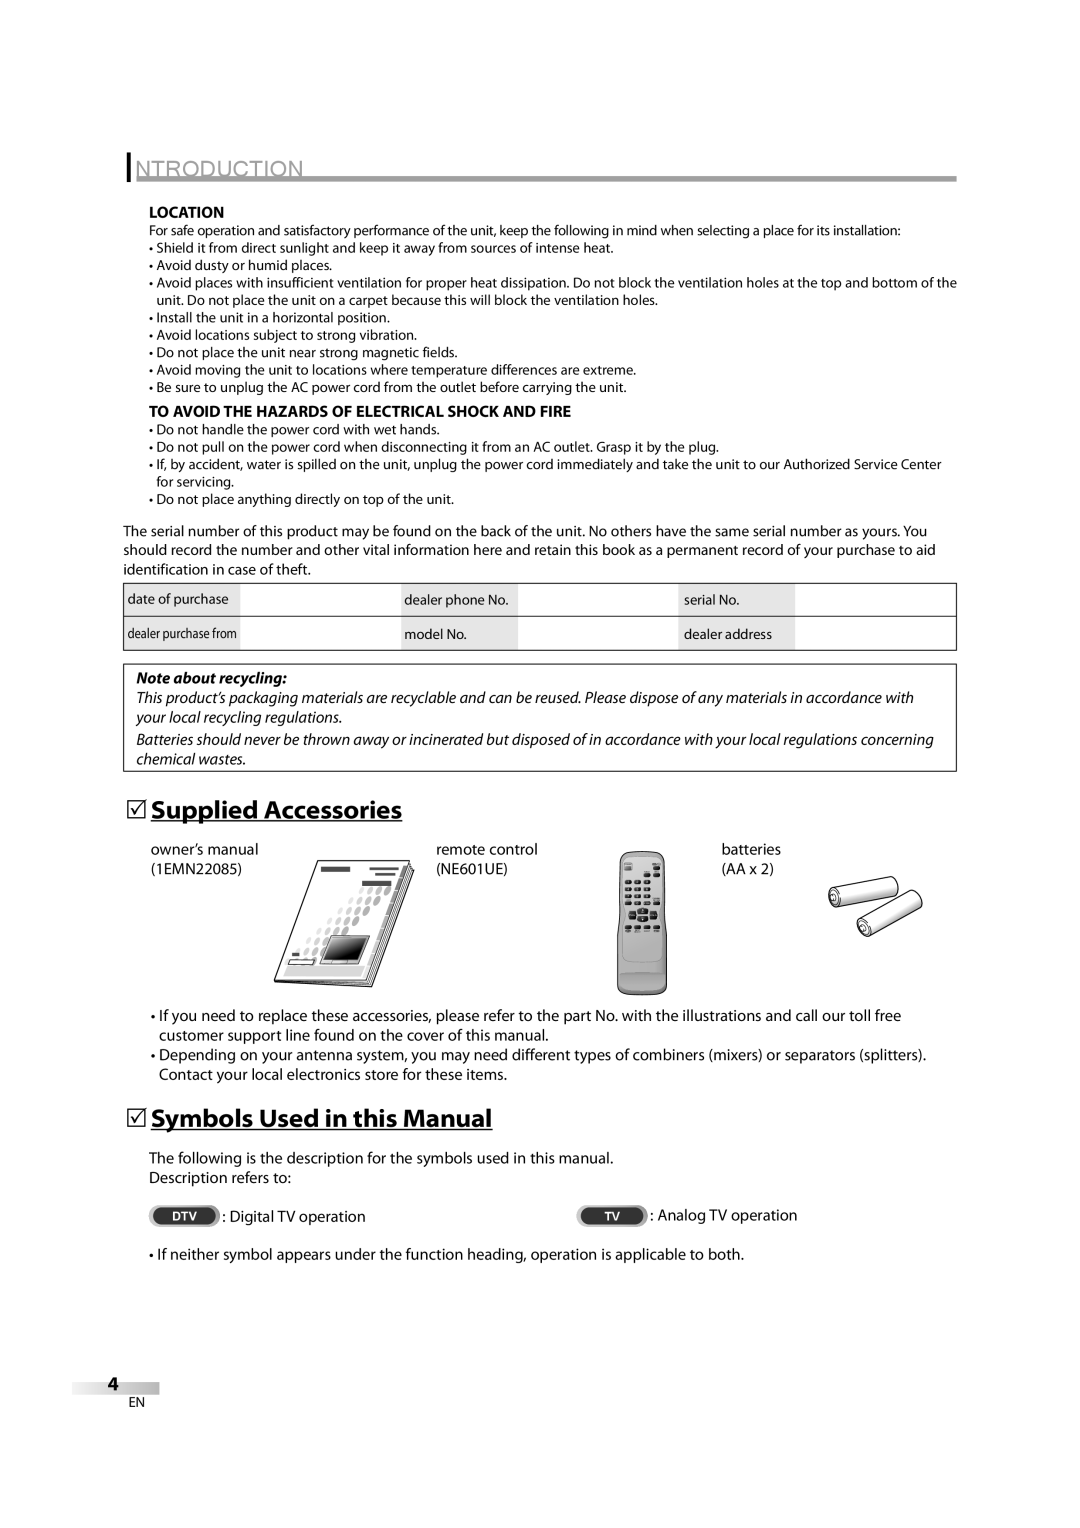 Sylvania CR202SL8 5Supplied Accessories, 5Symbols Used in this Manual, Introduction, Location, Note about recycling 